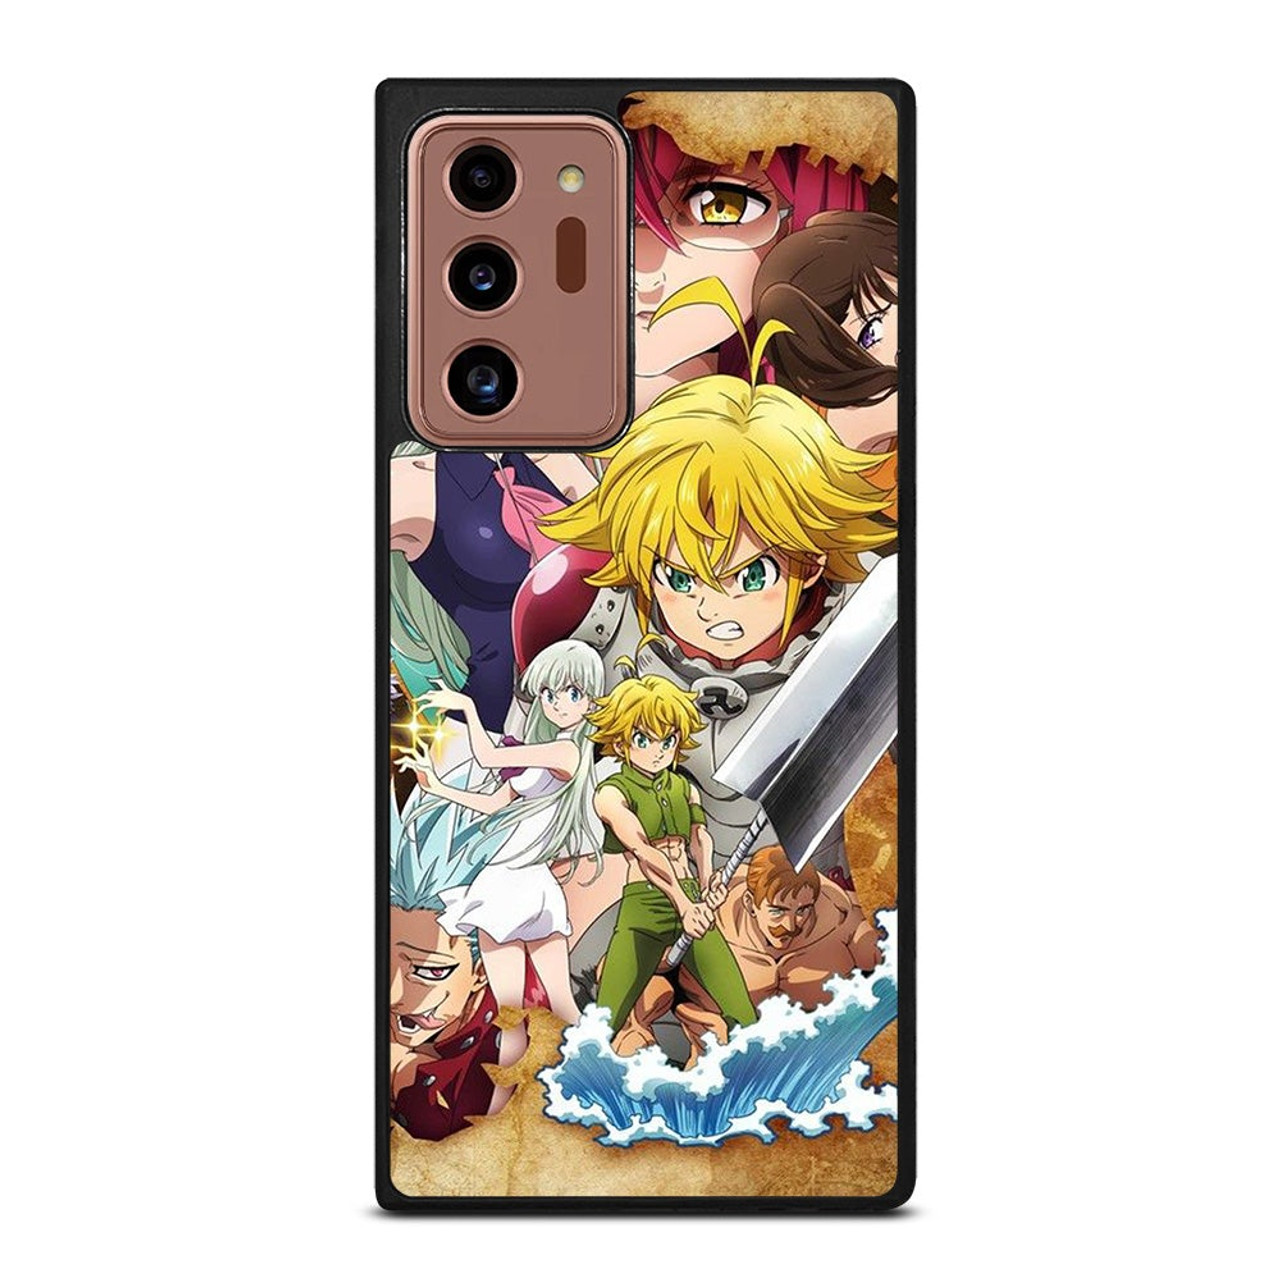 meliodas the seven deadly sins anime boy samsung g... iPhone Wallpapers  Free Download